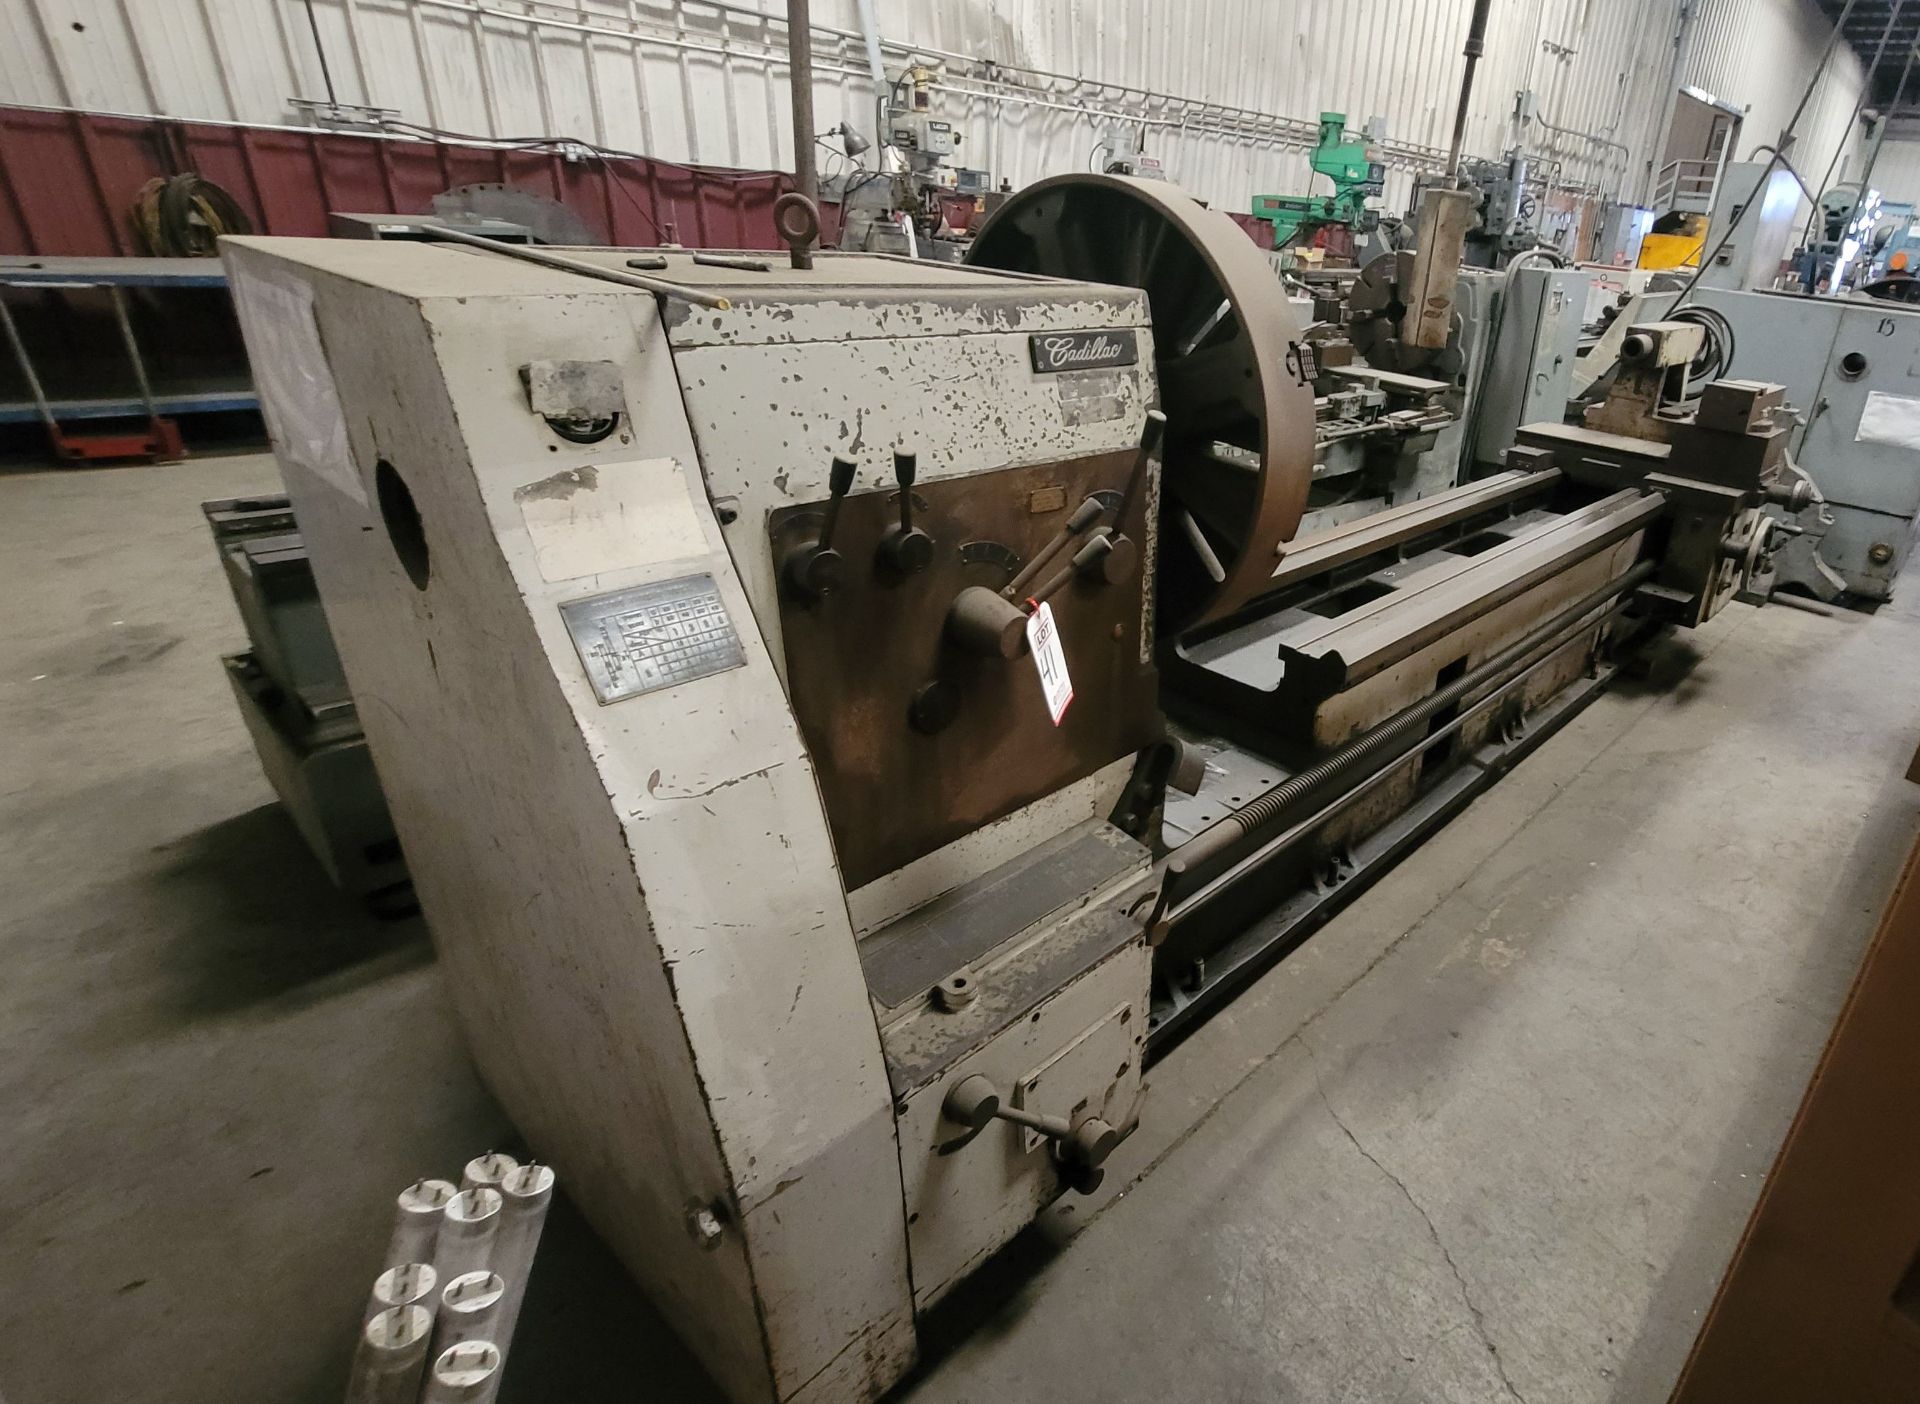 CADILLAC GAP BED ENGINE LATHE, MODEL 32120, 32" X 120", 42" SWING IN GAP, TAILSTOCK, S/N 267014 - Image 3 of 10